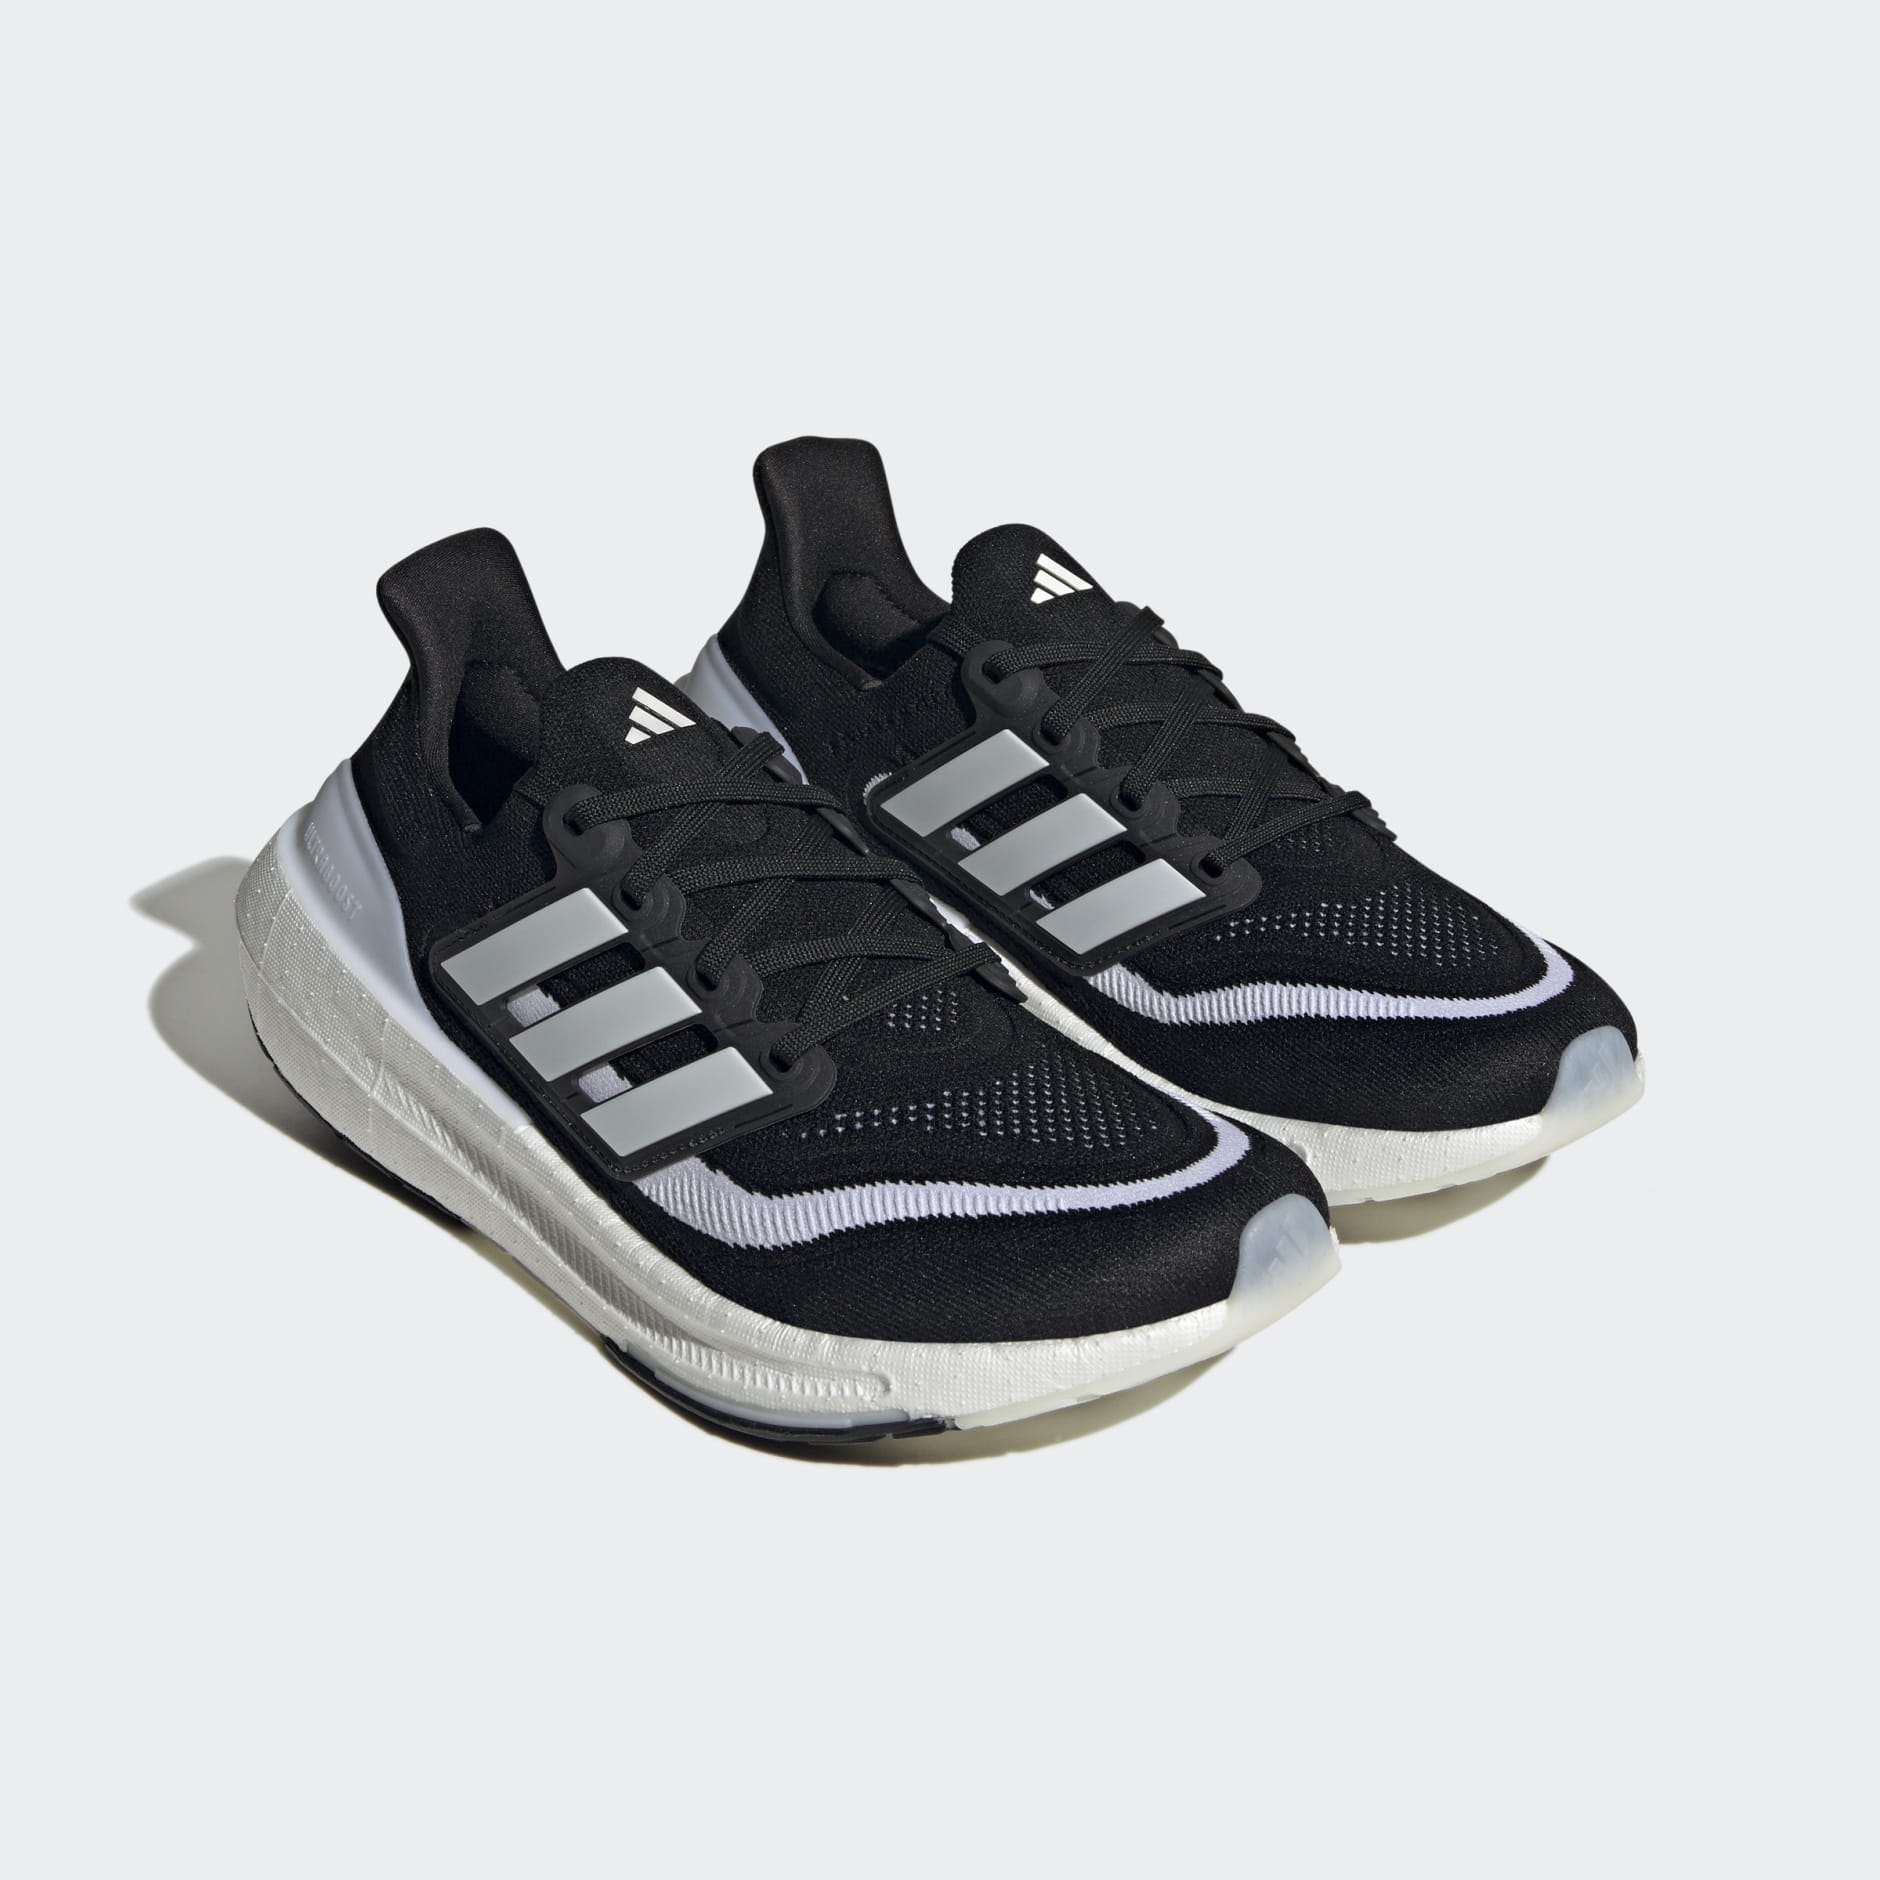 Shoes - Ultraboost Light Shoes - Black | adidas South Africa